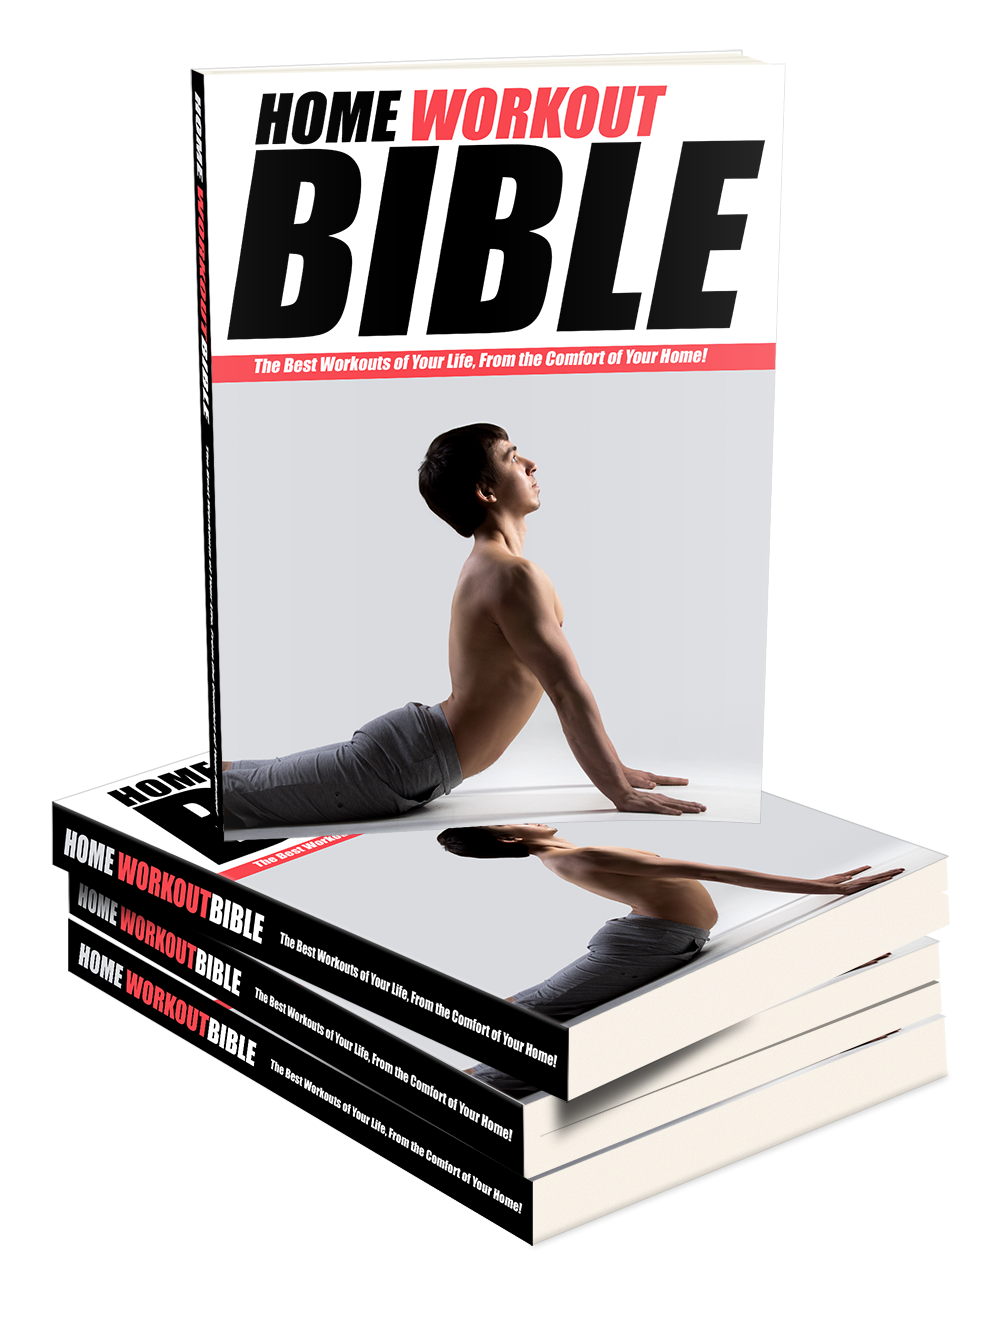 Home Workout BIBLE